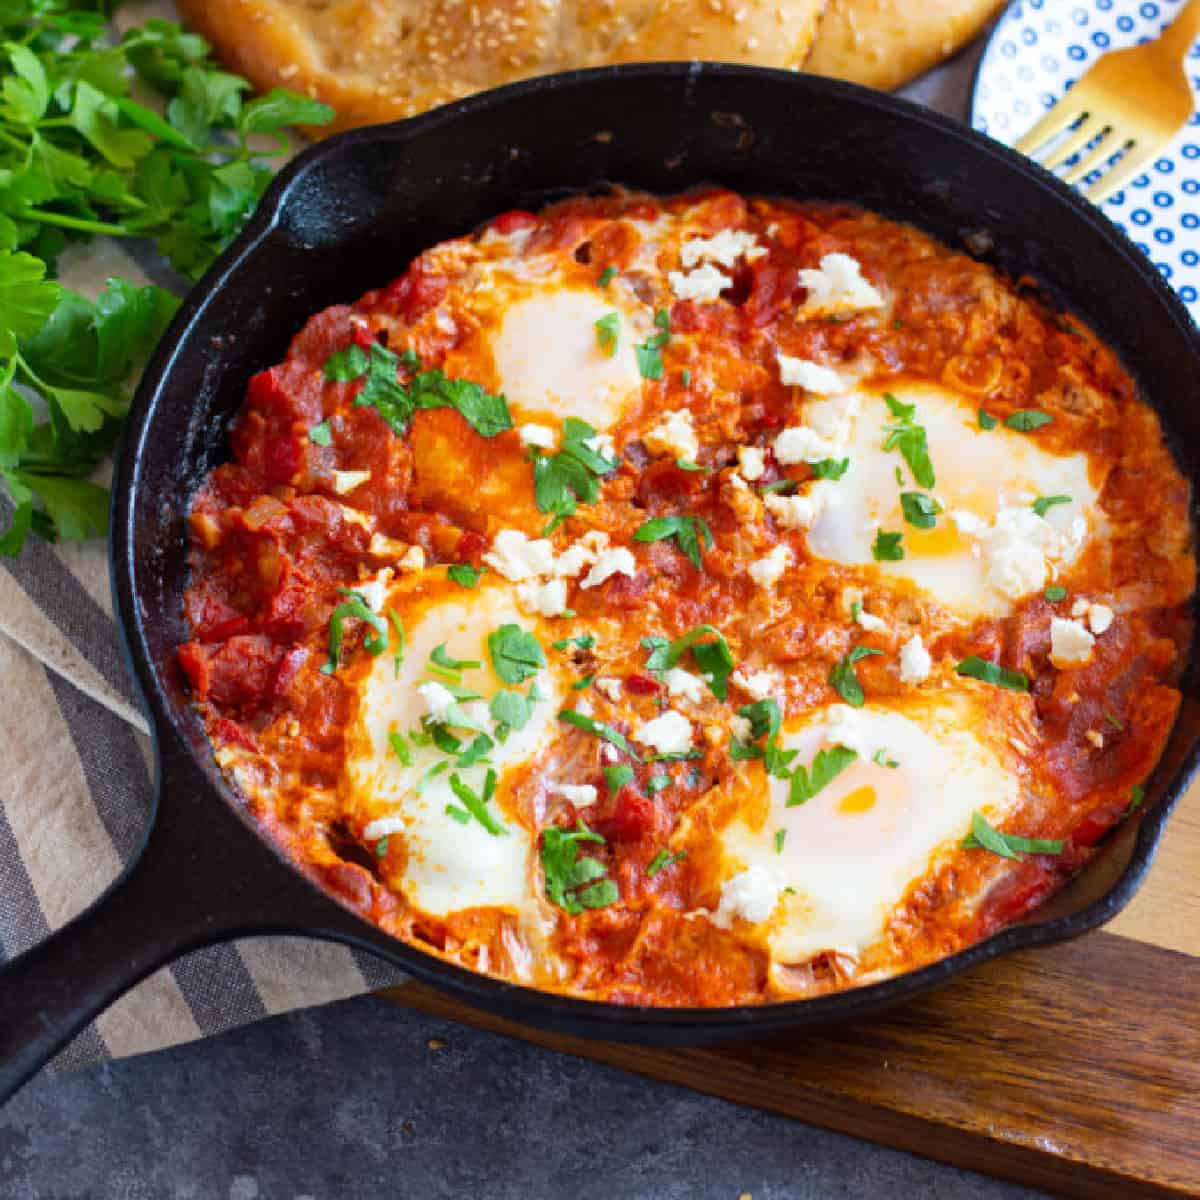 Shakshuka with feta is great for brunch. Eggs are poached in a delicious tomato sauce flavored with warm spices and vegetables and then topped with creamy feta. Learn how to make this easy one skillet breakfast recipe and enjoy it any day of the week.
